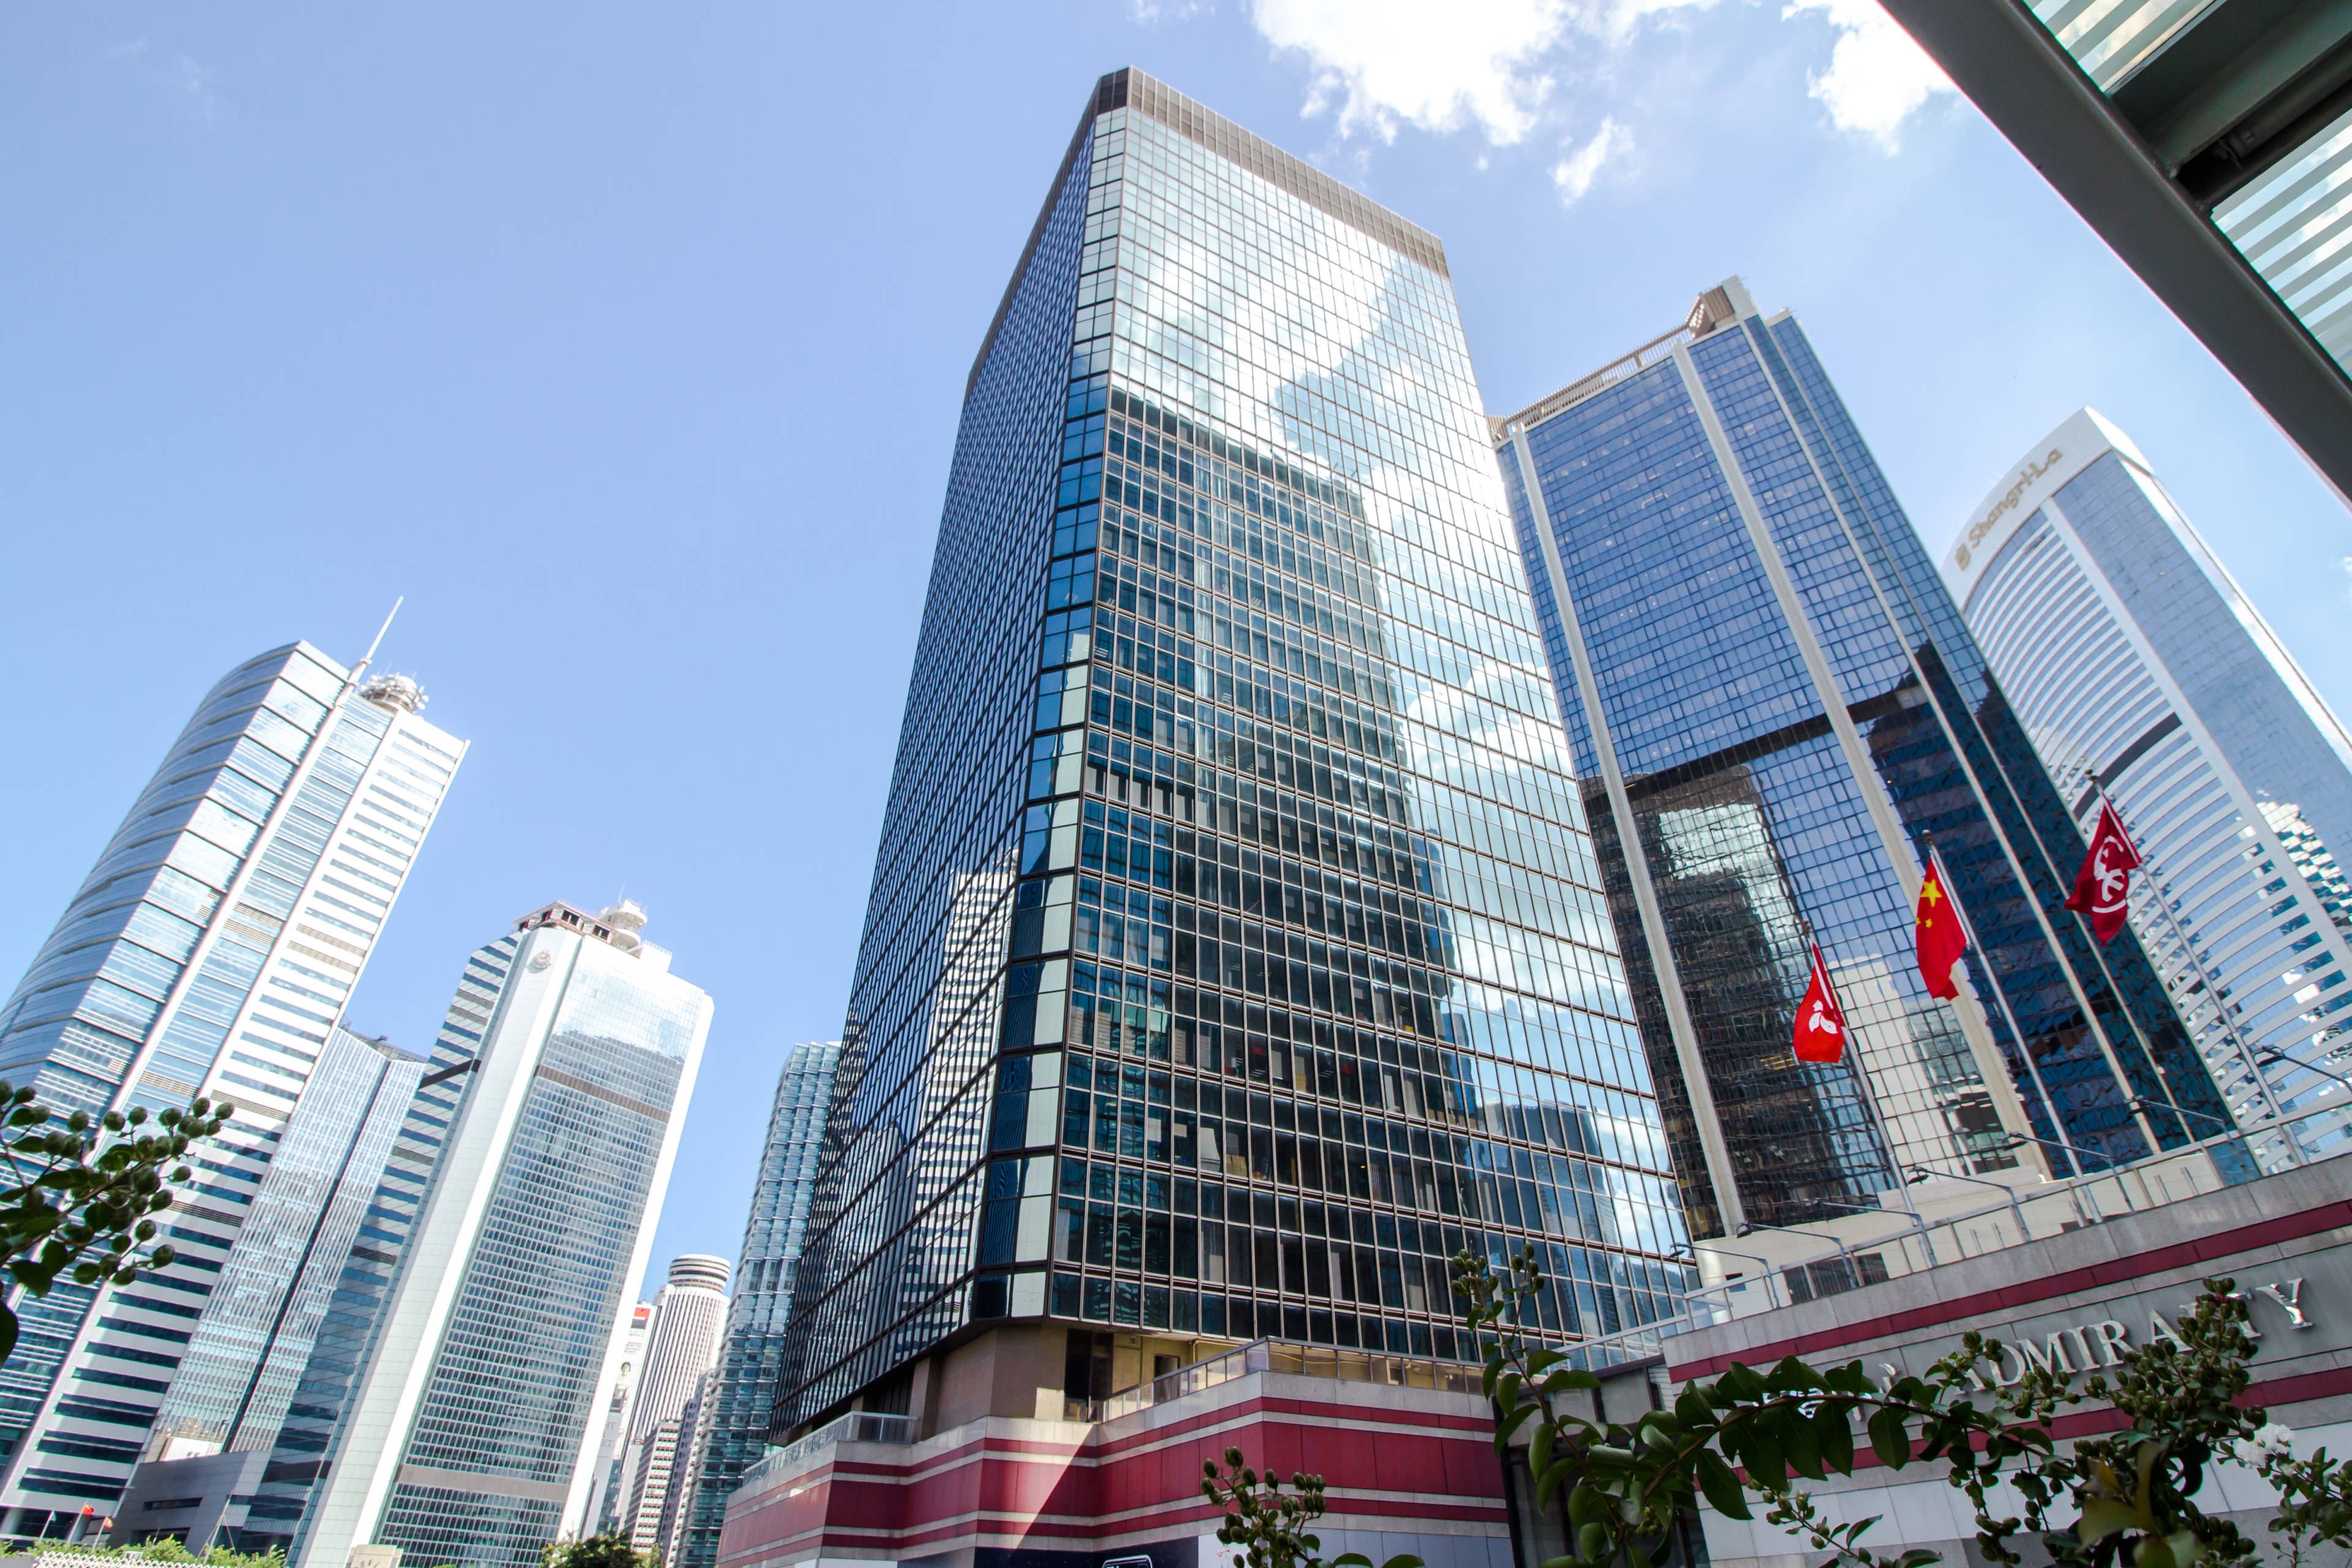 15/F, ADMIRALTY CENTRE TOWER 1, 18 HARCOURT ROAD, ADMIRALTY, HONG KONG